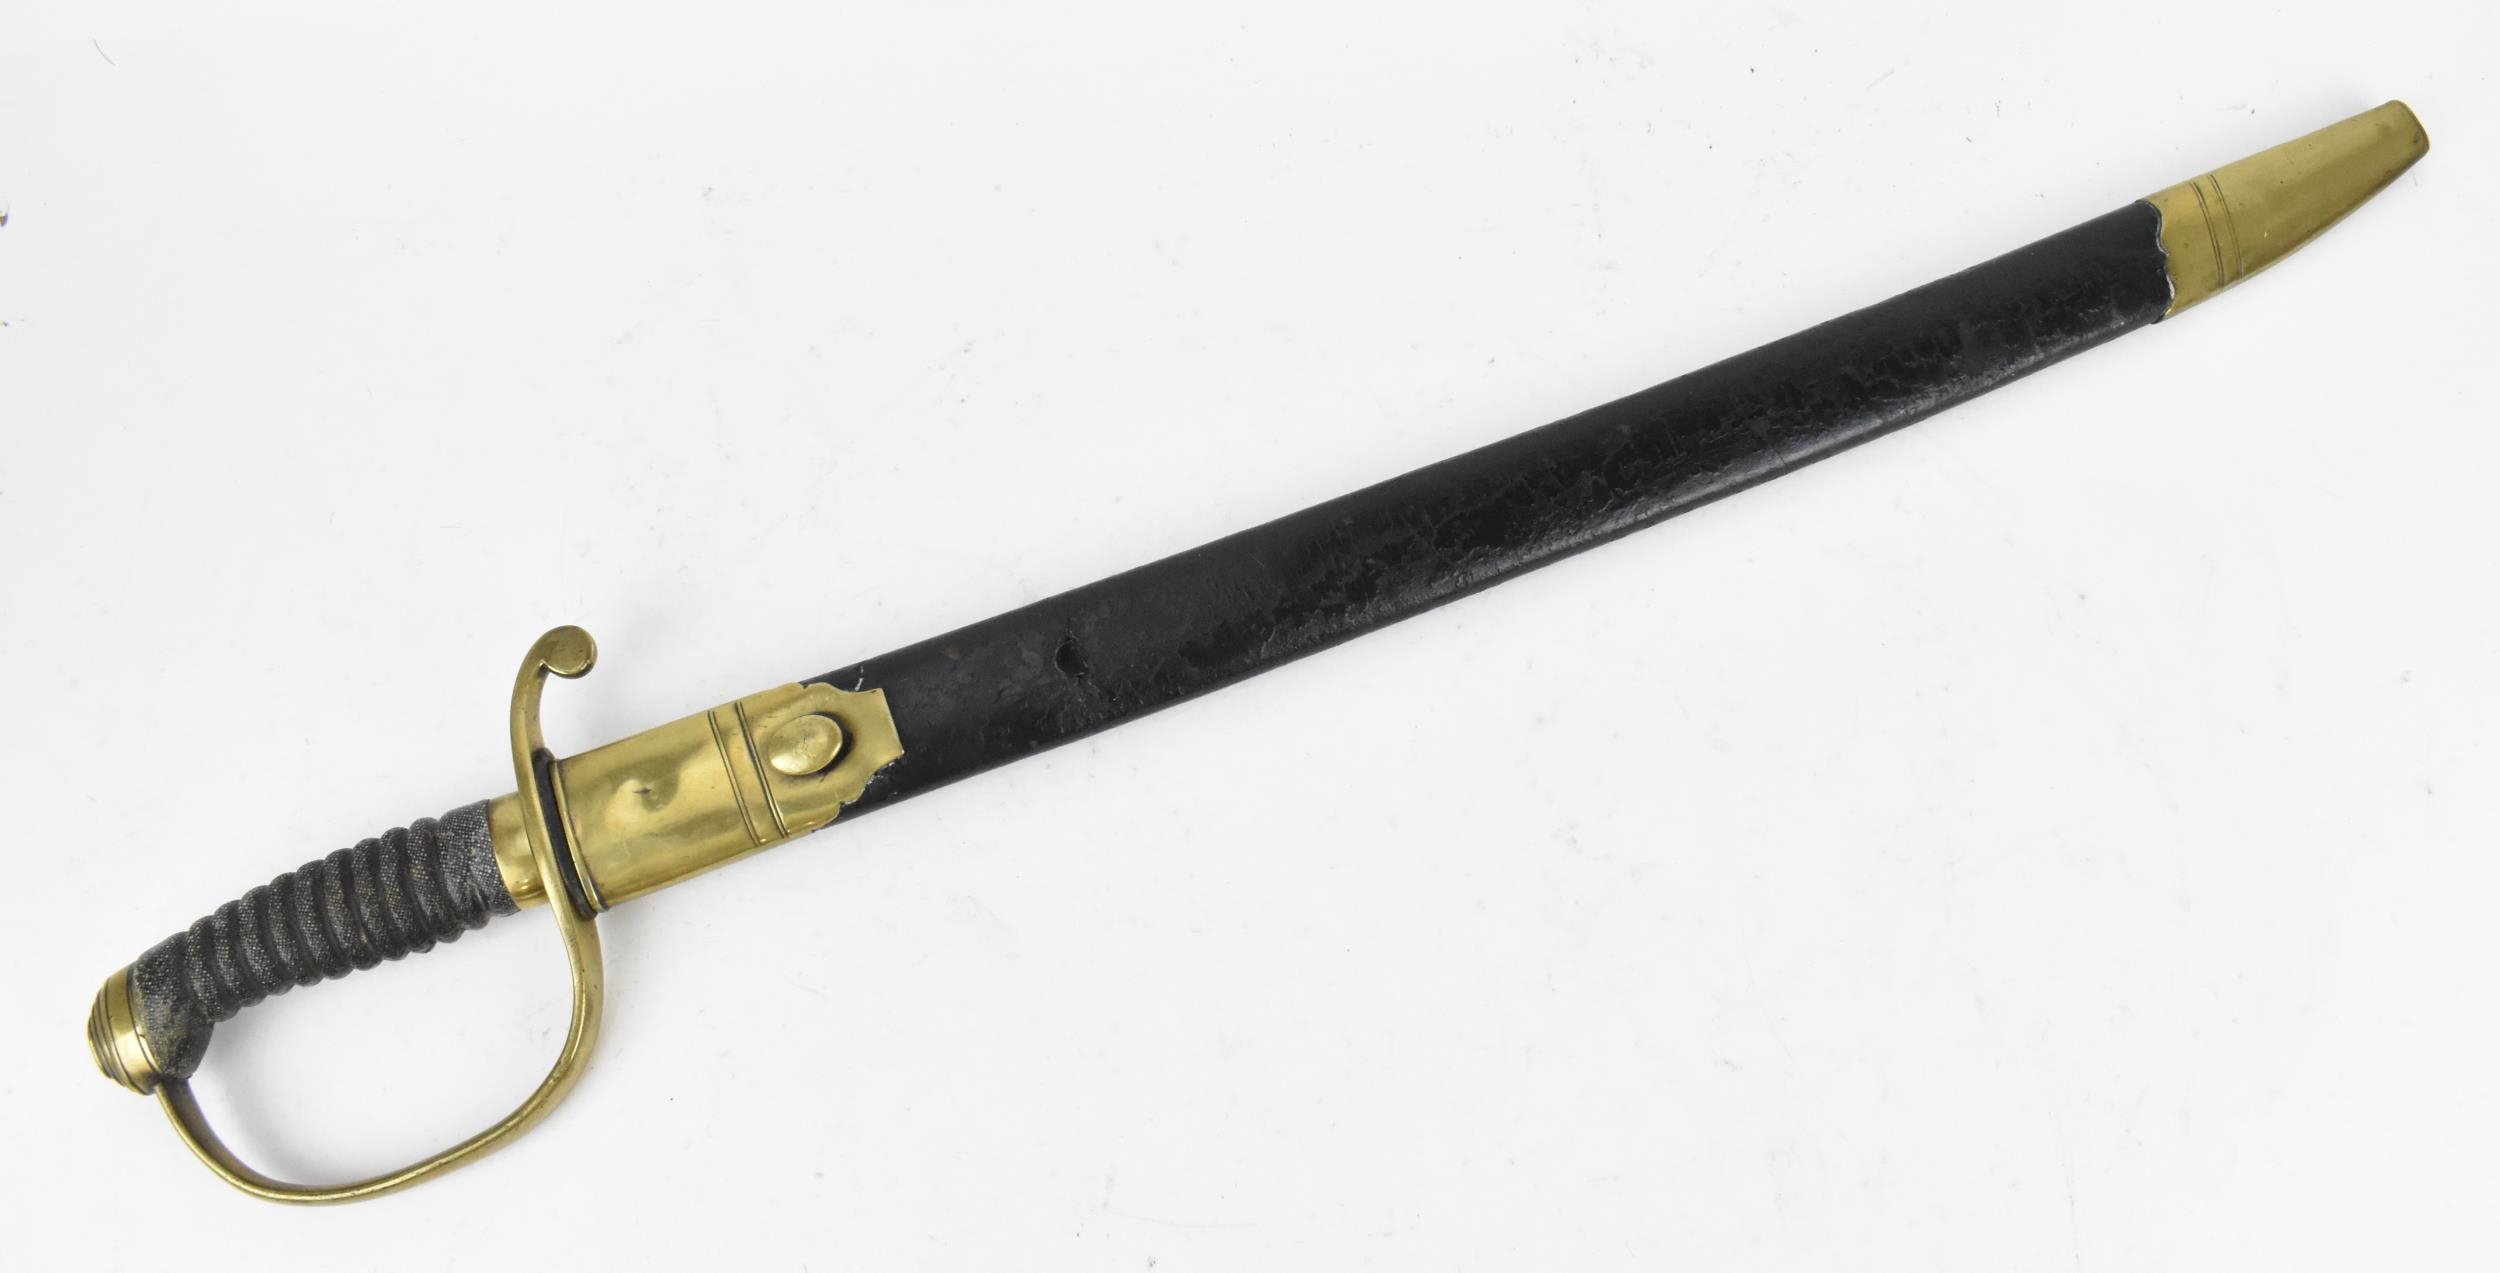 A 19th century police officer short sword/hanger, with shagreen grip and brass pommel, with